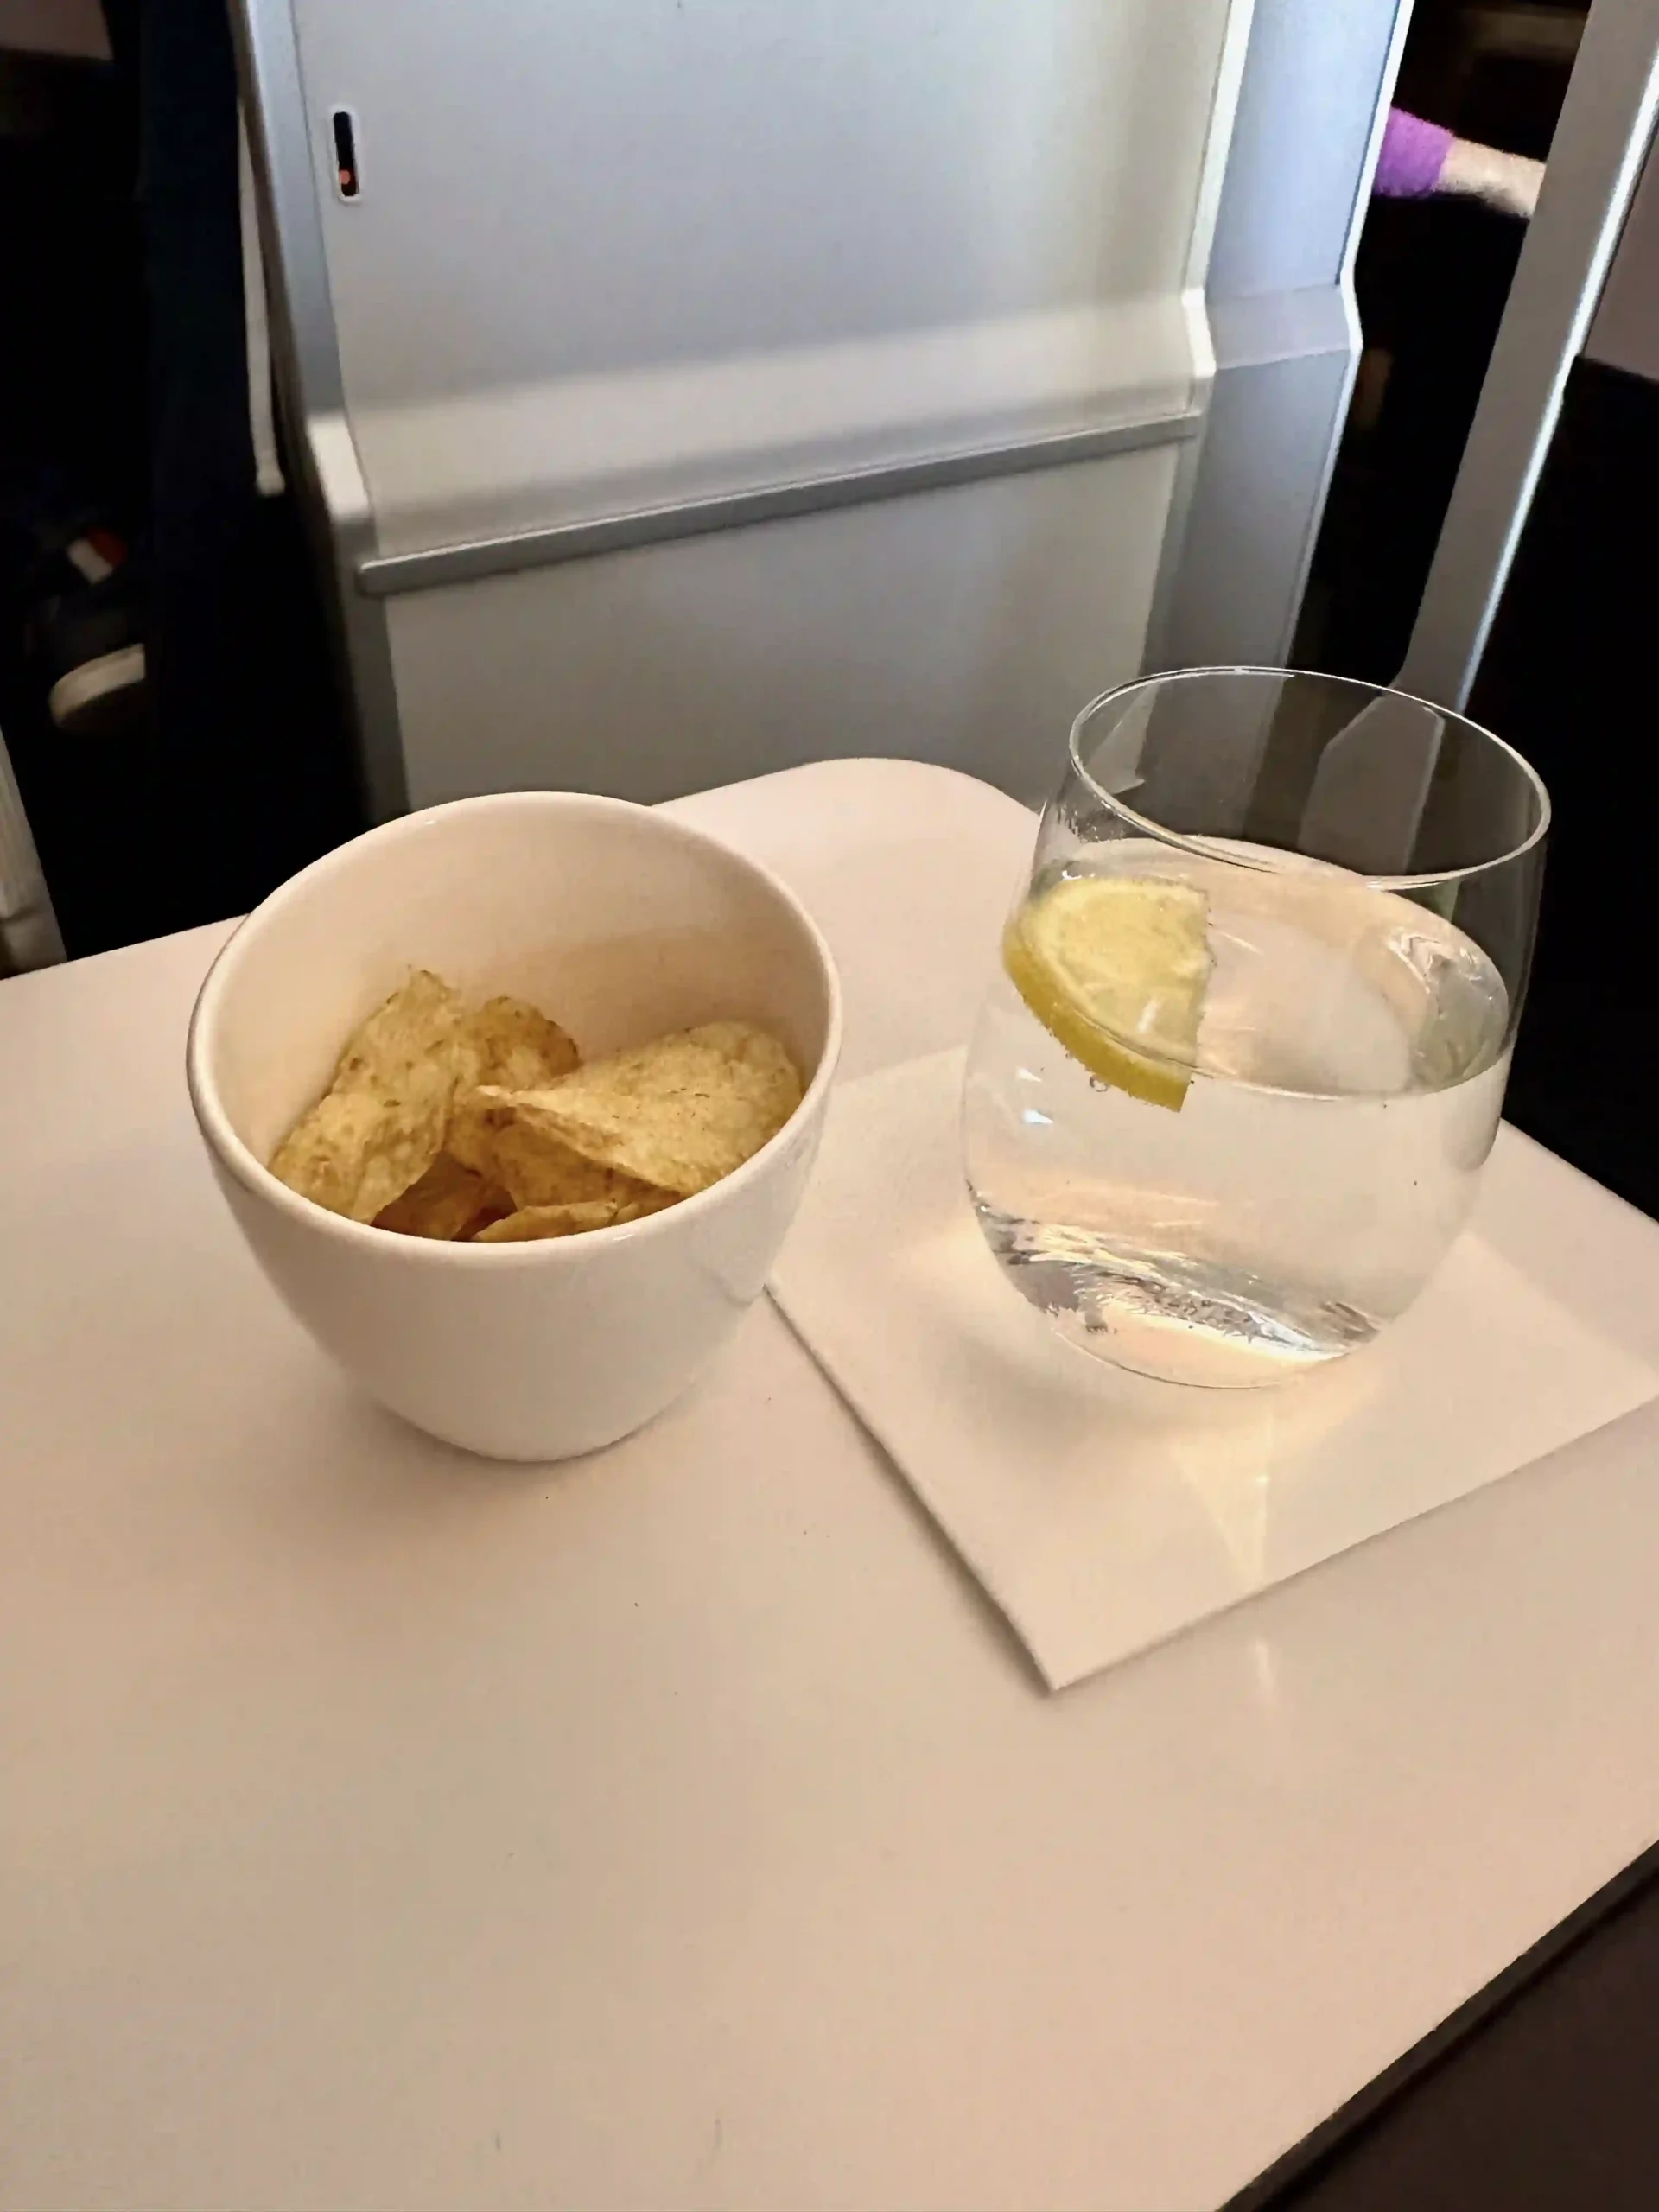 a bowl of chips and a glass of water on a table